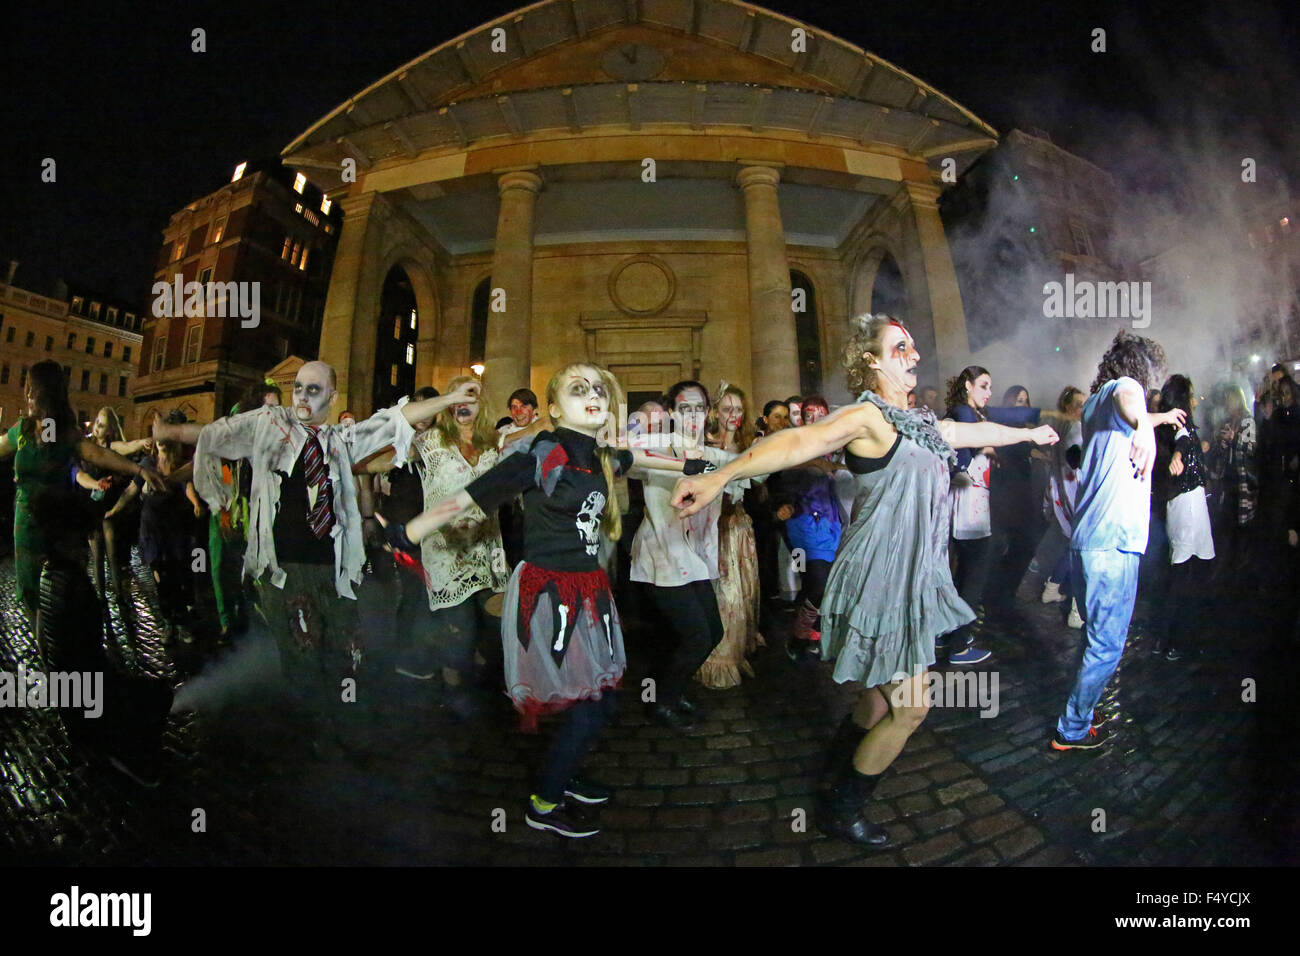 London, UK. 24th October 2015. Participants dressed as Zombies at the Thrill the World Zombie Flash Mob, Covent Garden, London which is an annual worldwide event to try and break the record for the most number of people dancing simultaneously to Michael Jackson's Thriller. It also raises money for humanitarian and charitable causes. Credit:  Paul Brown/Alamy Live News Stock Photo